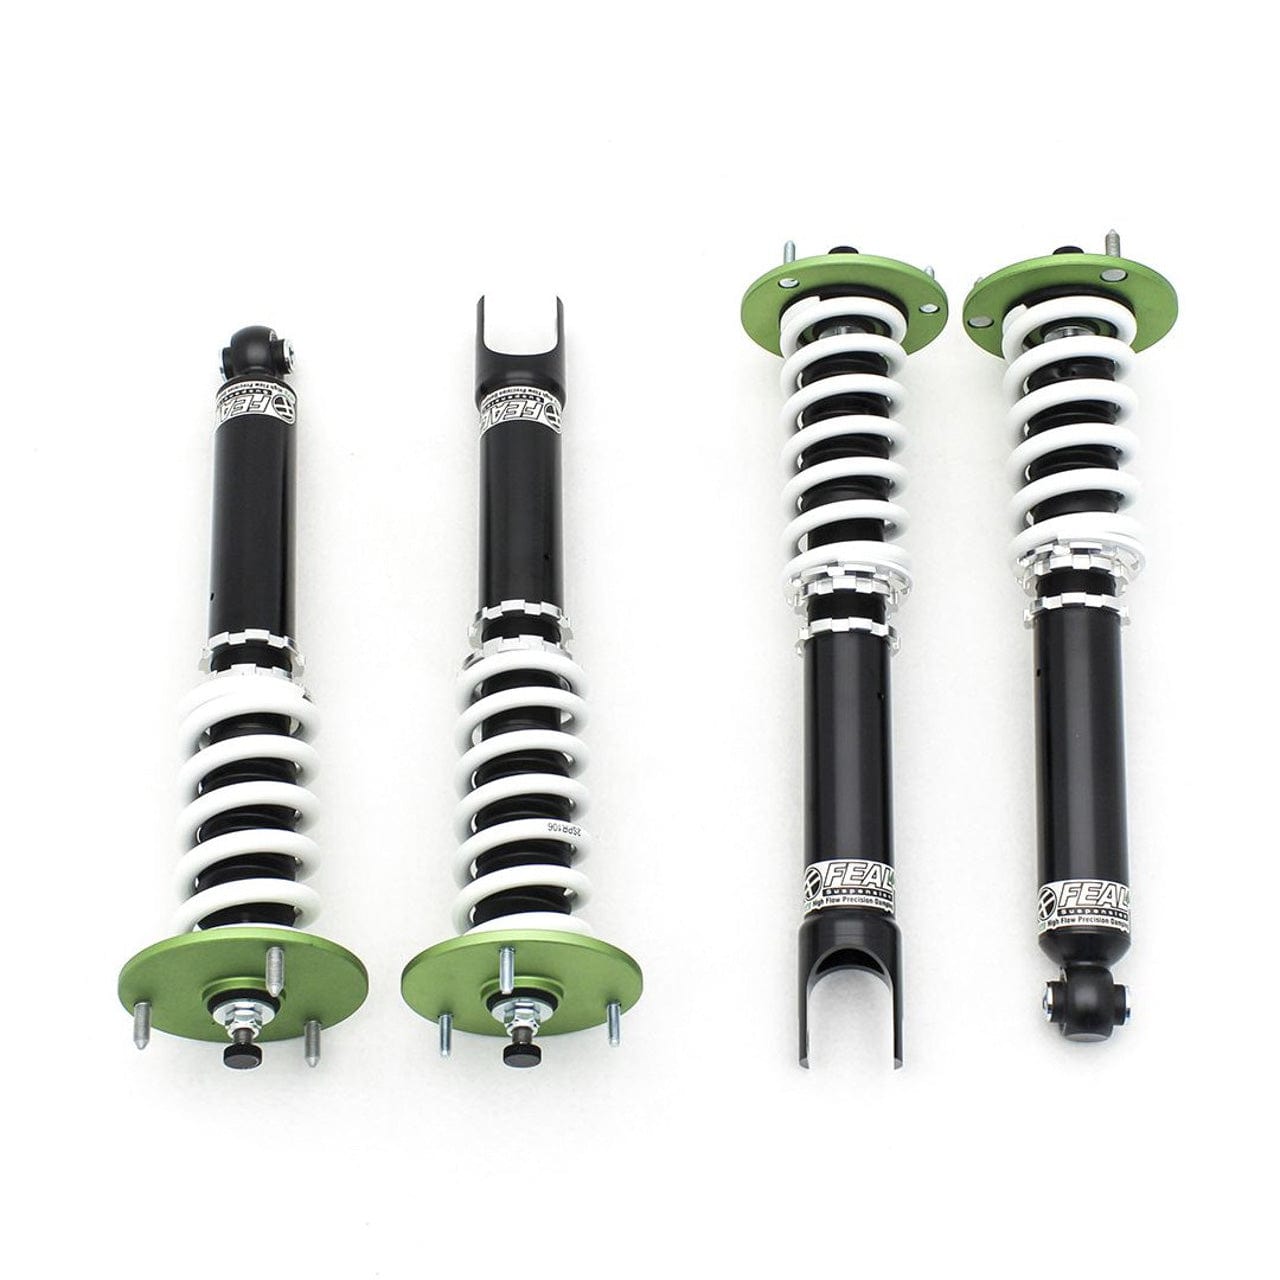 Feal 441 Coilovers (True Rear) - 1994-2004 Ford Mustang SN95 441FO-02T